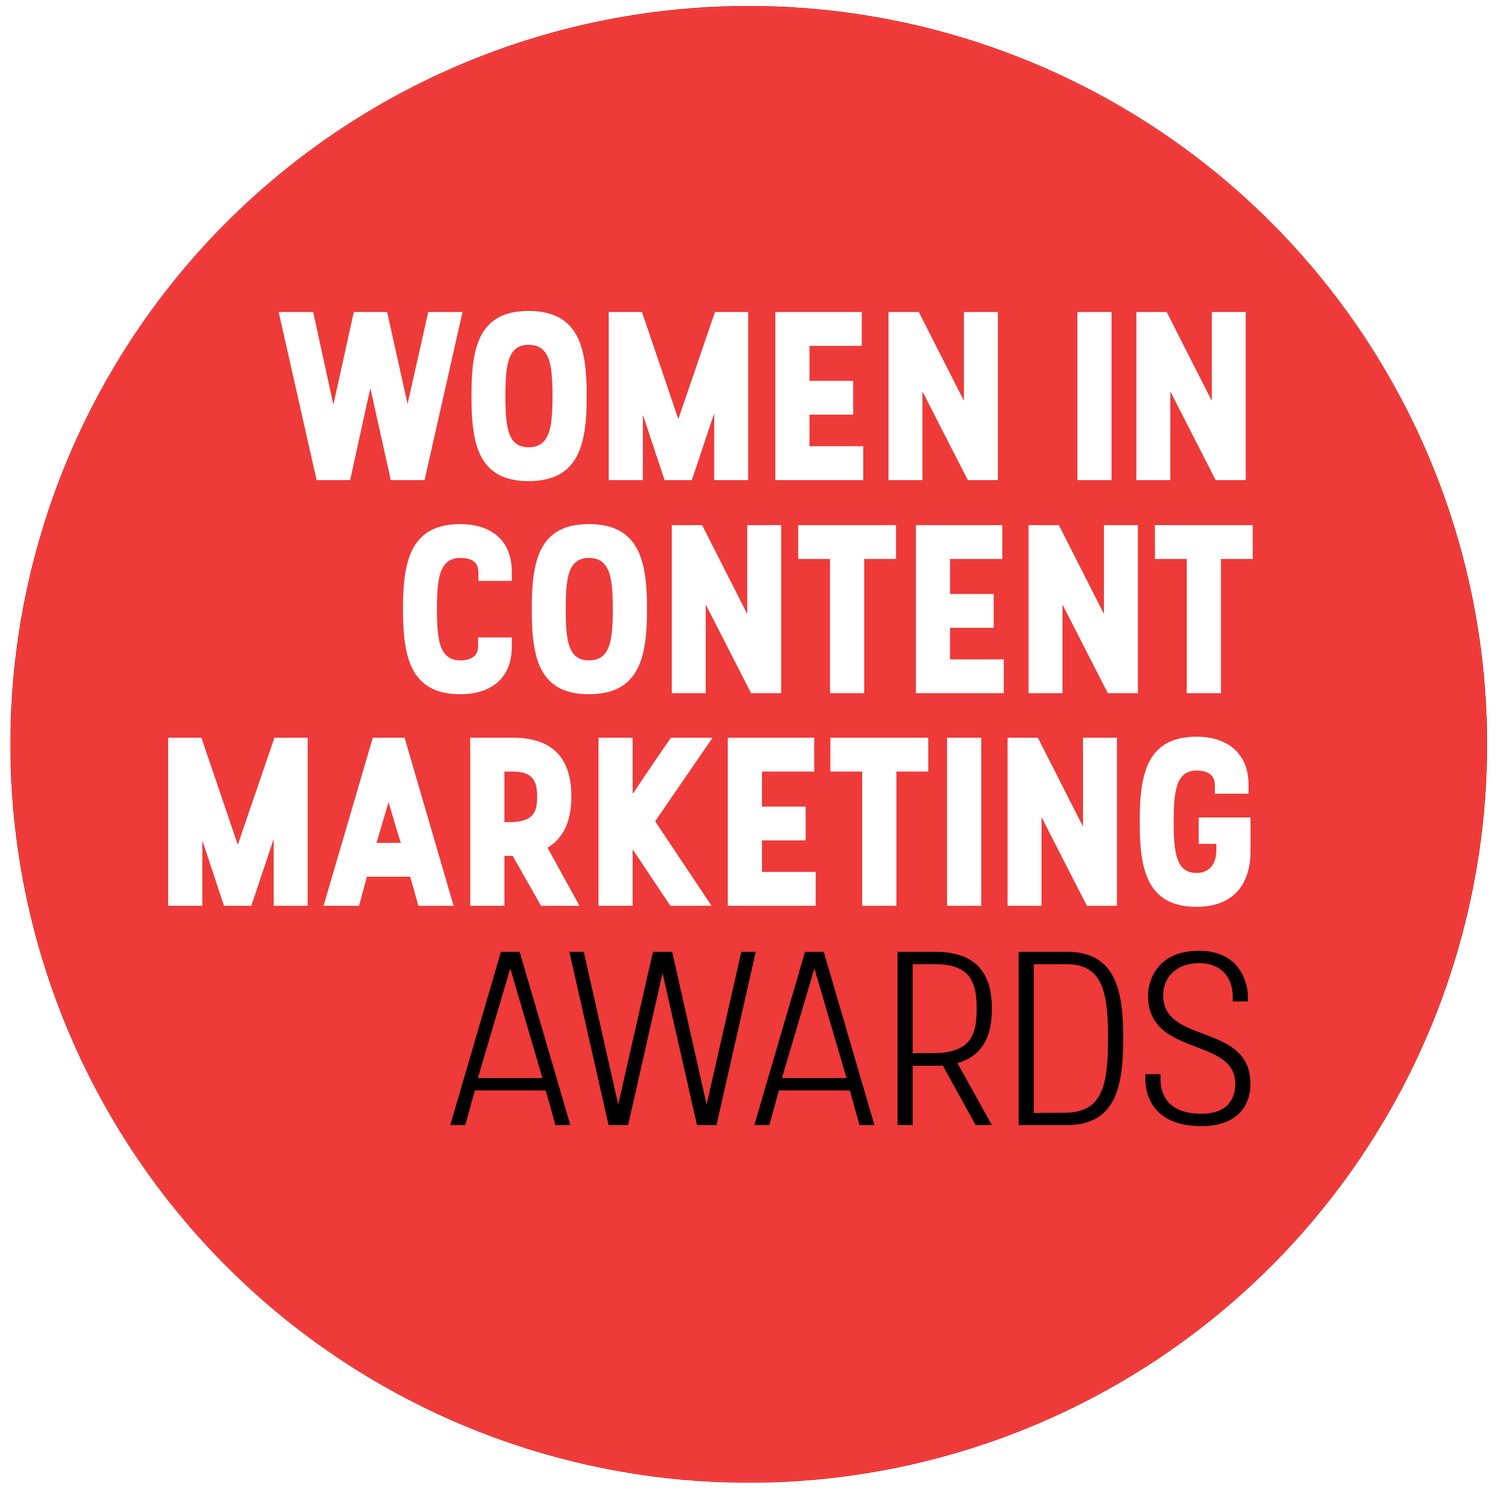 Women in Content Marketing Awards